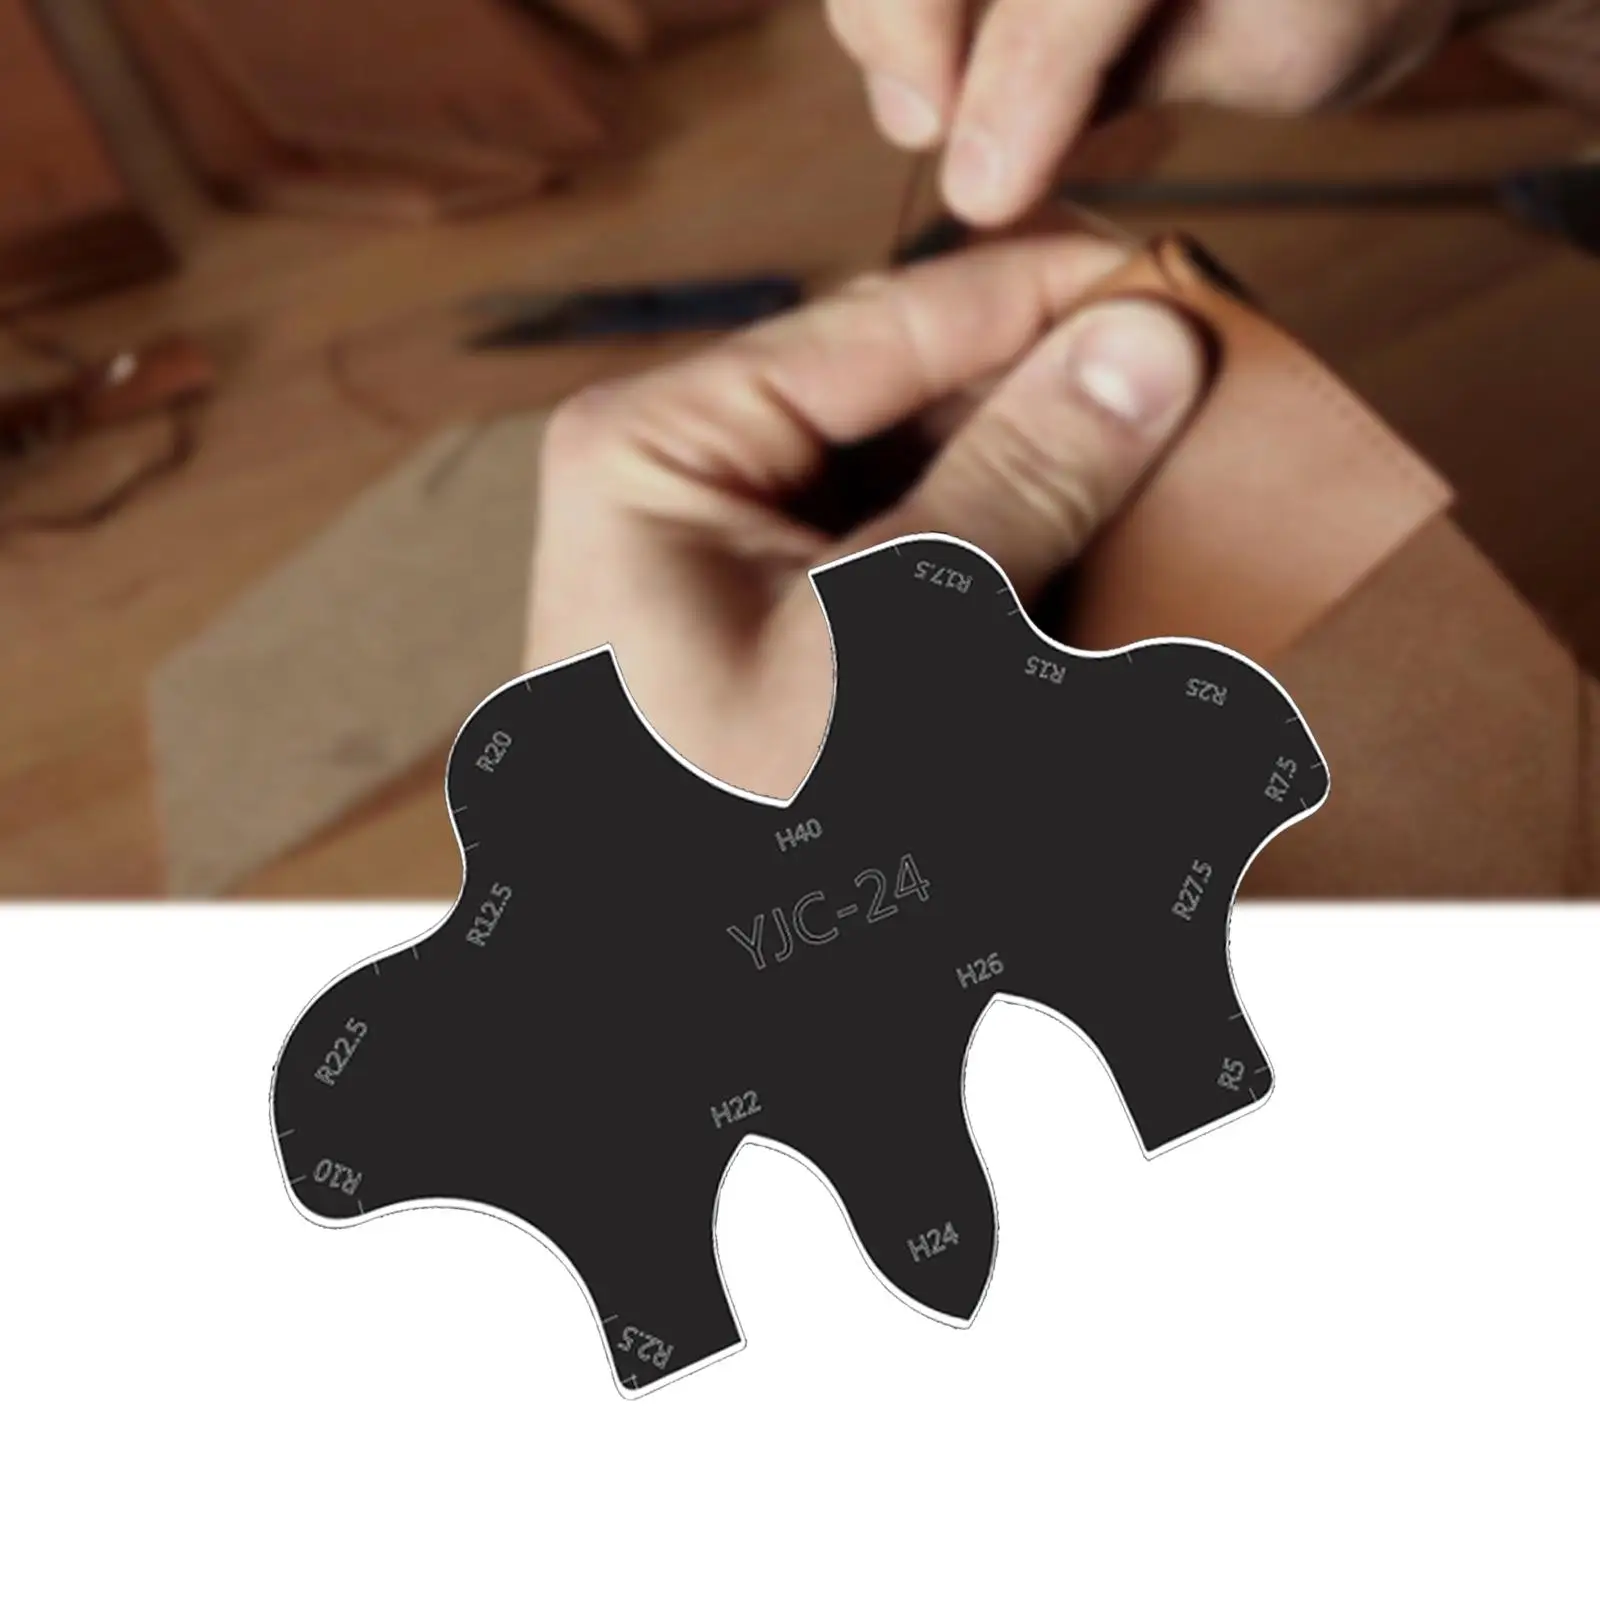 Leather Bag Sewing Template Acrylic Stencil Practical Patchwork Handmade Craft Template for Wallet Making Tailor Starter